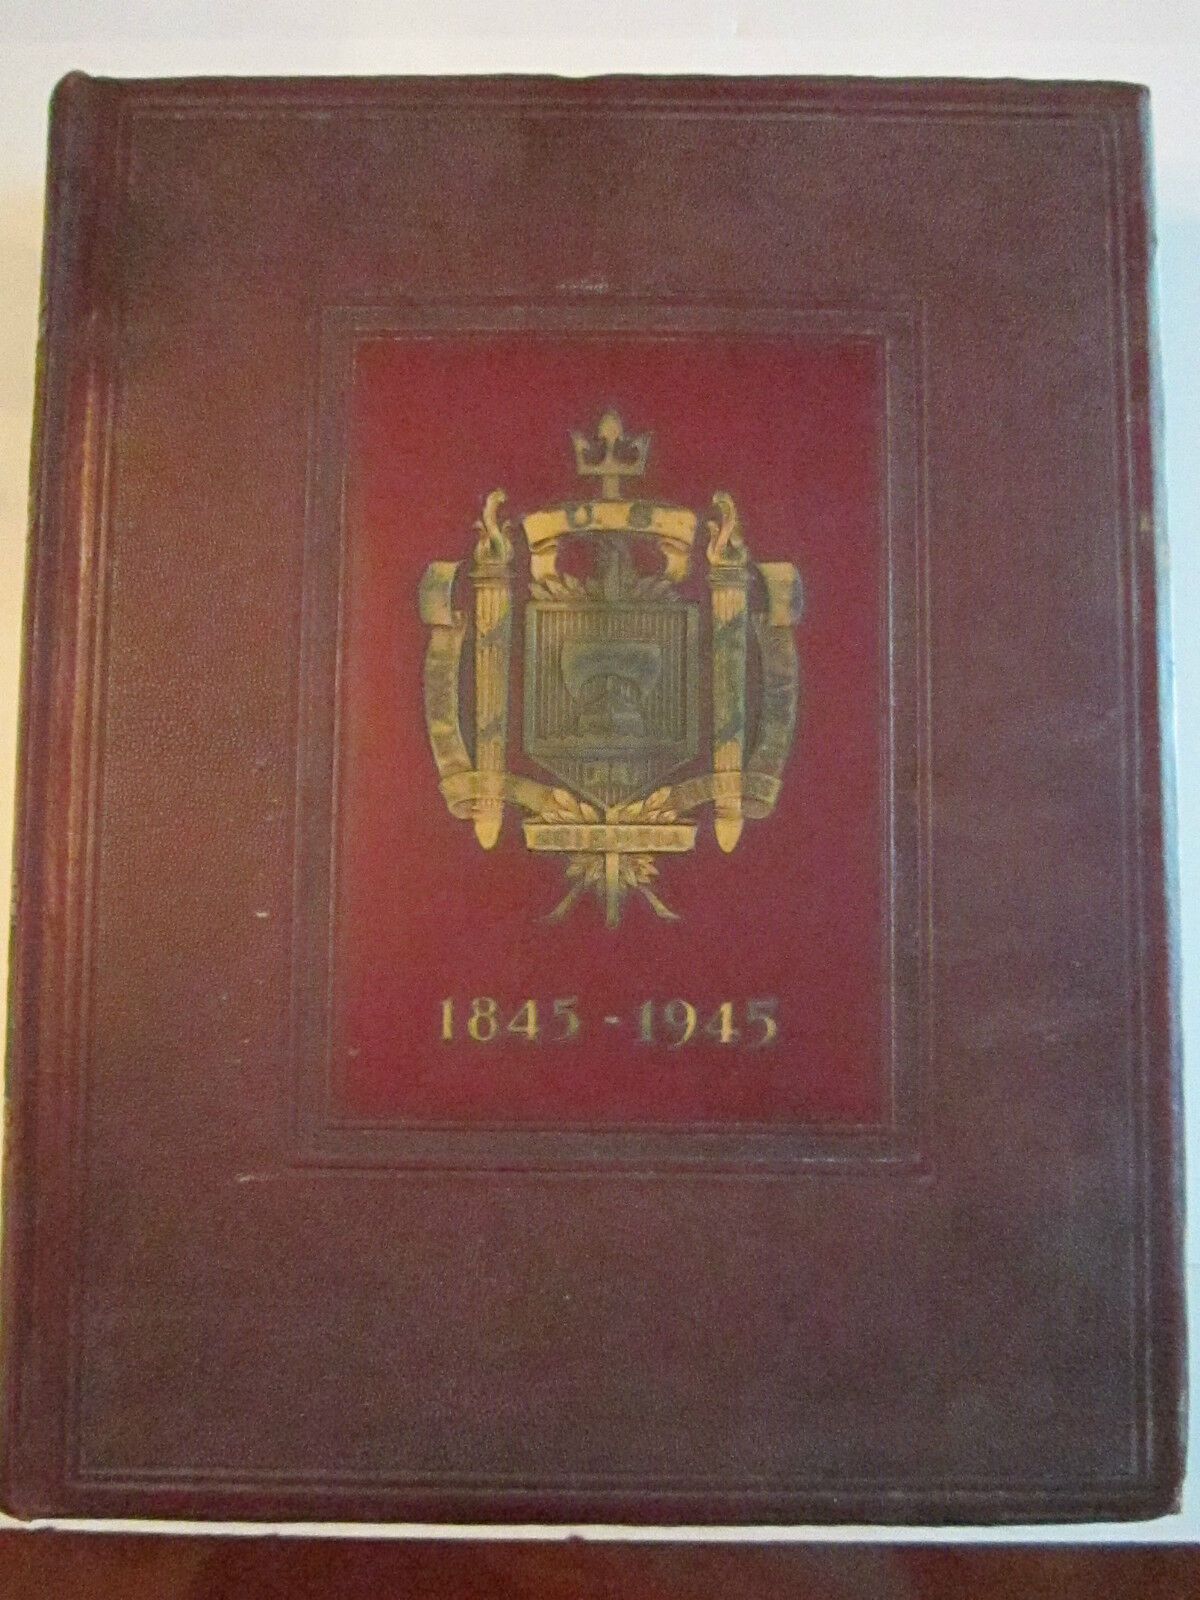 1945 U.S. NAVAL ACADEMY LUCKY BAG CENTENNIAL YEARBOOK - GREAT CONDITION -